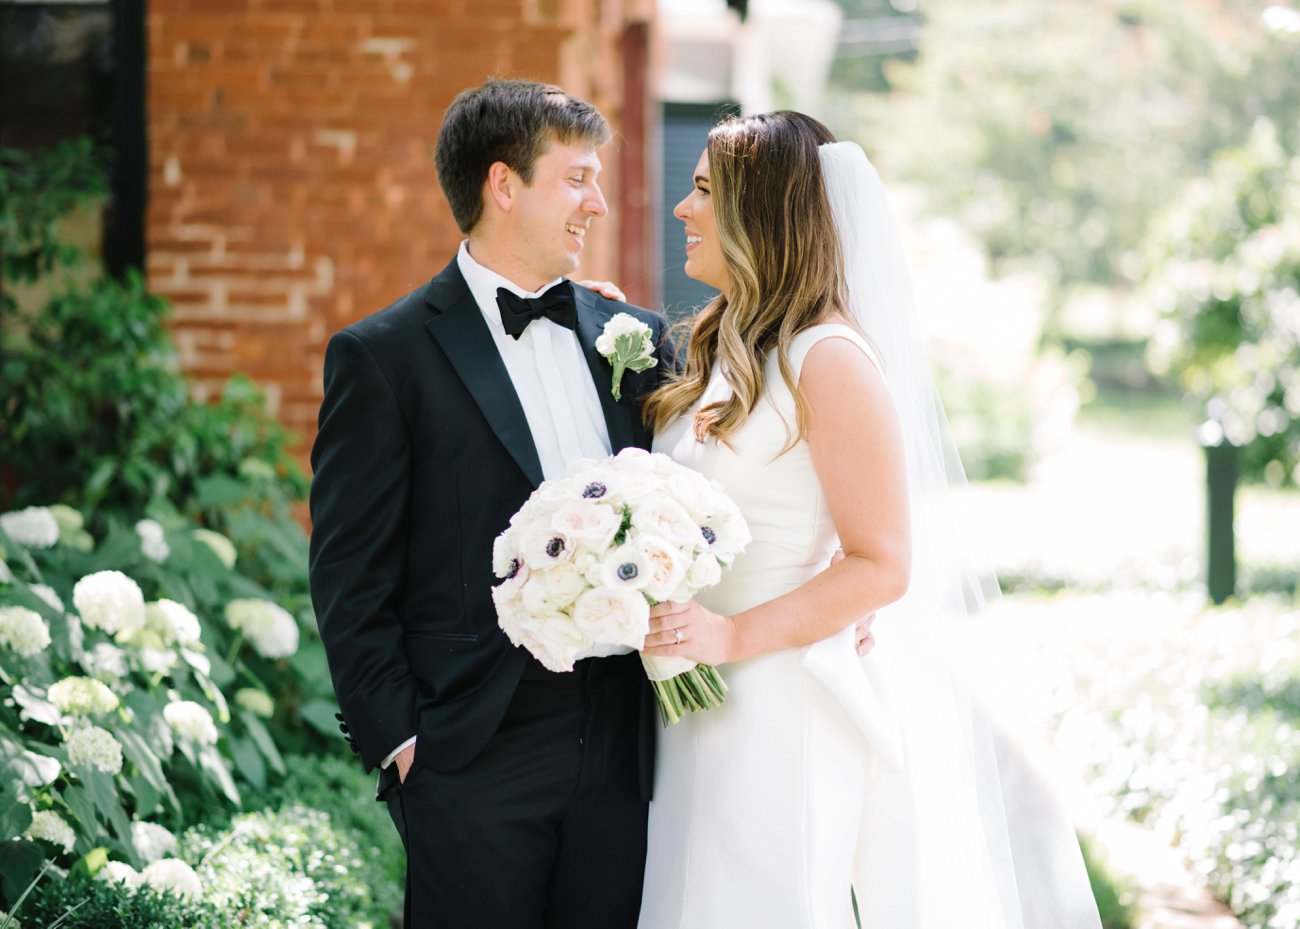 Classic southern bride and groom portraits